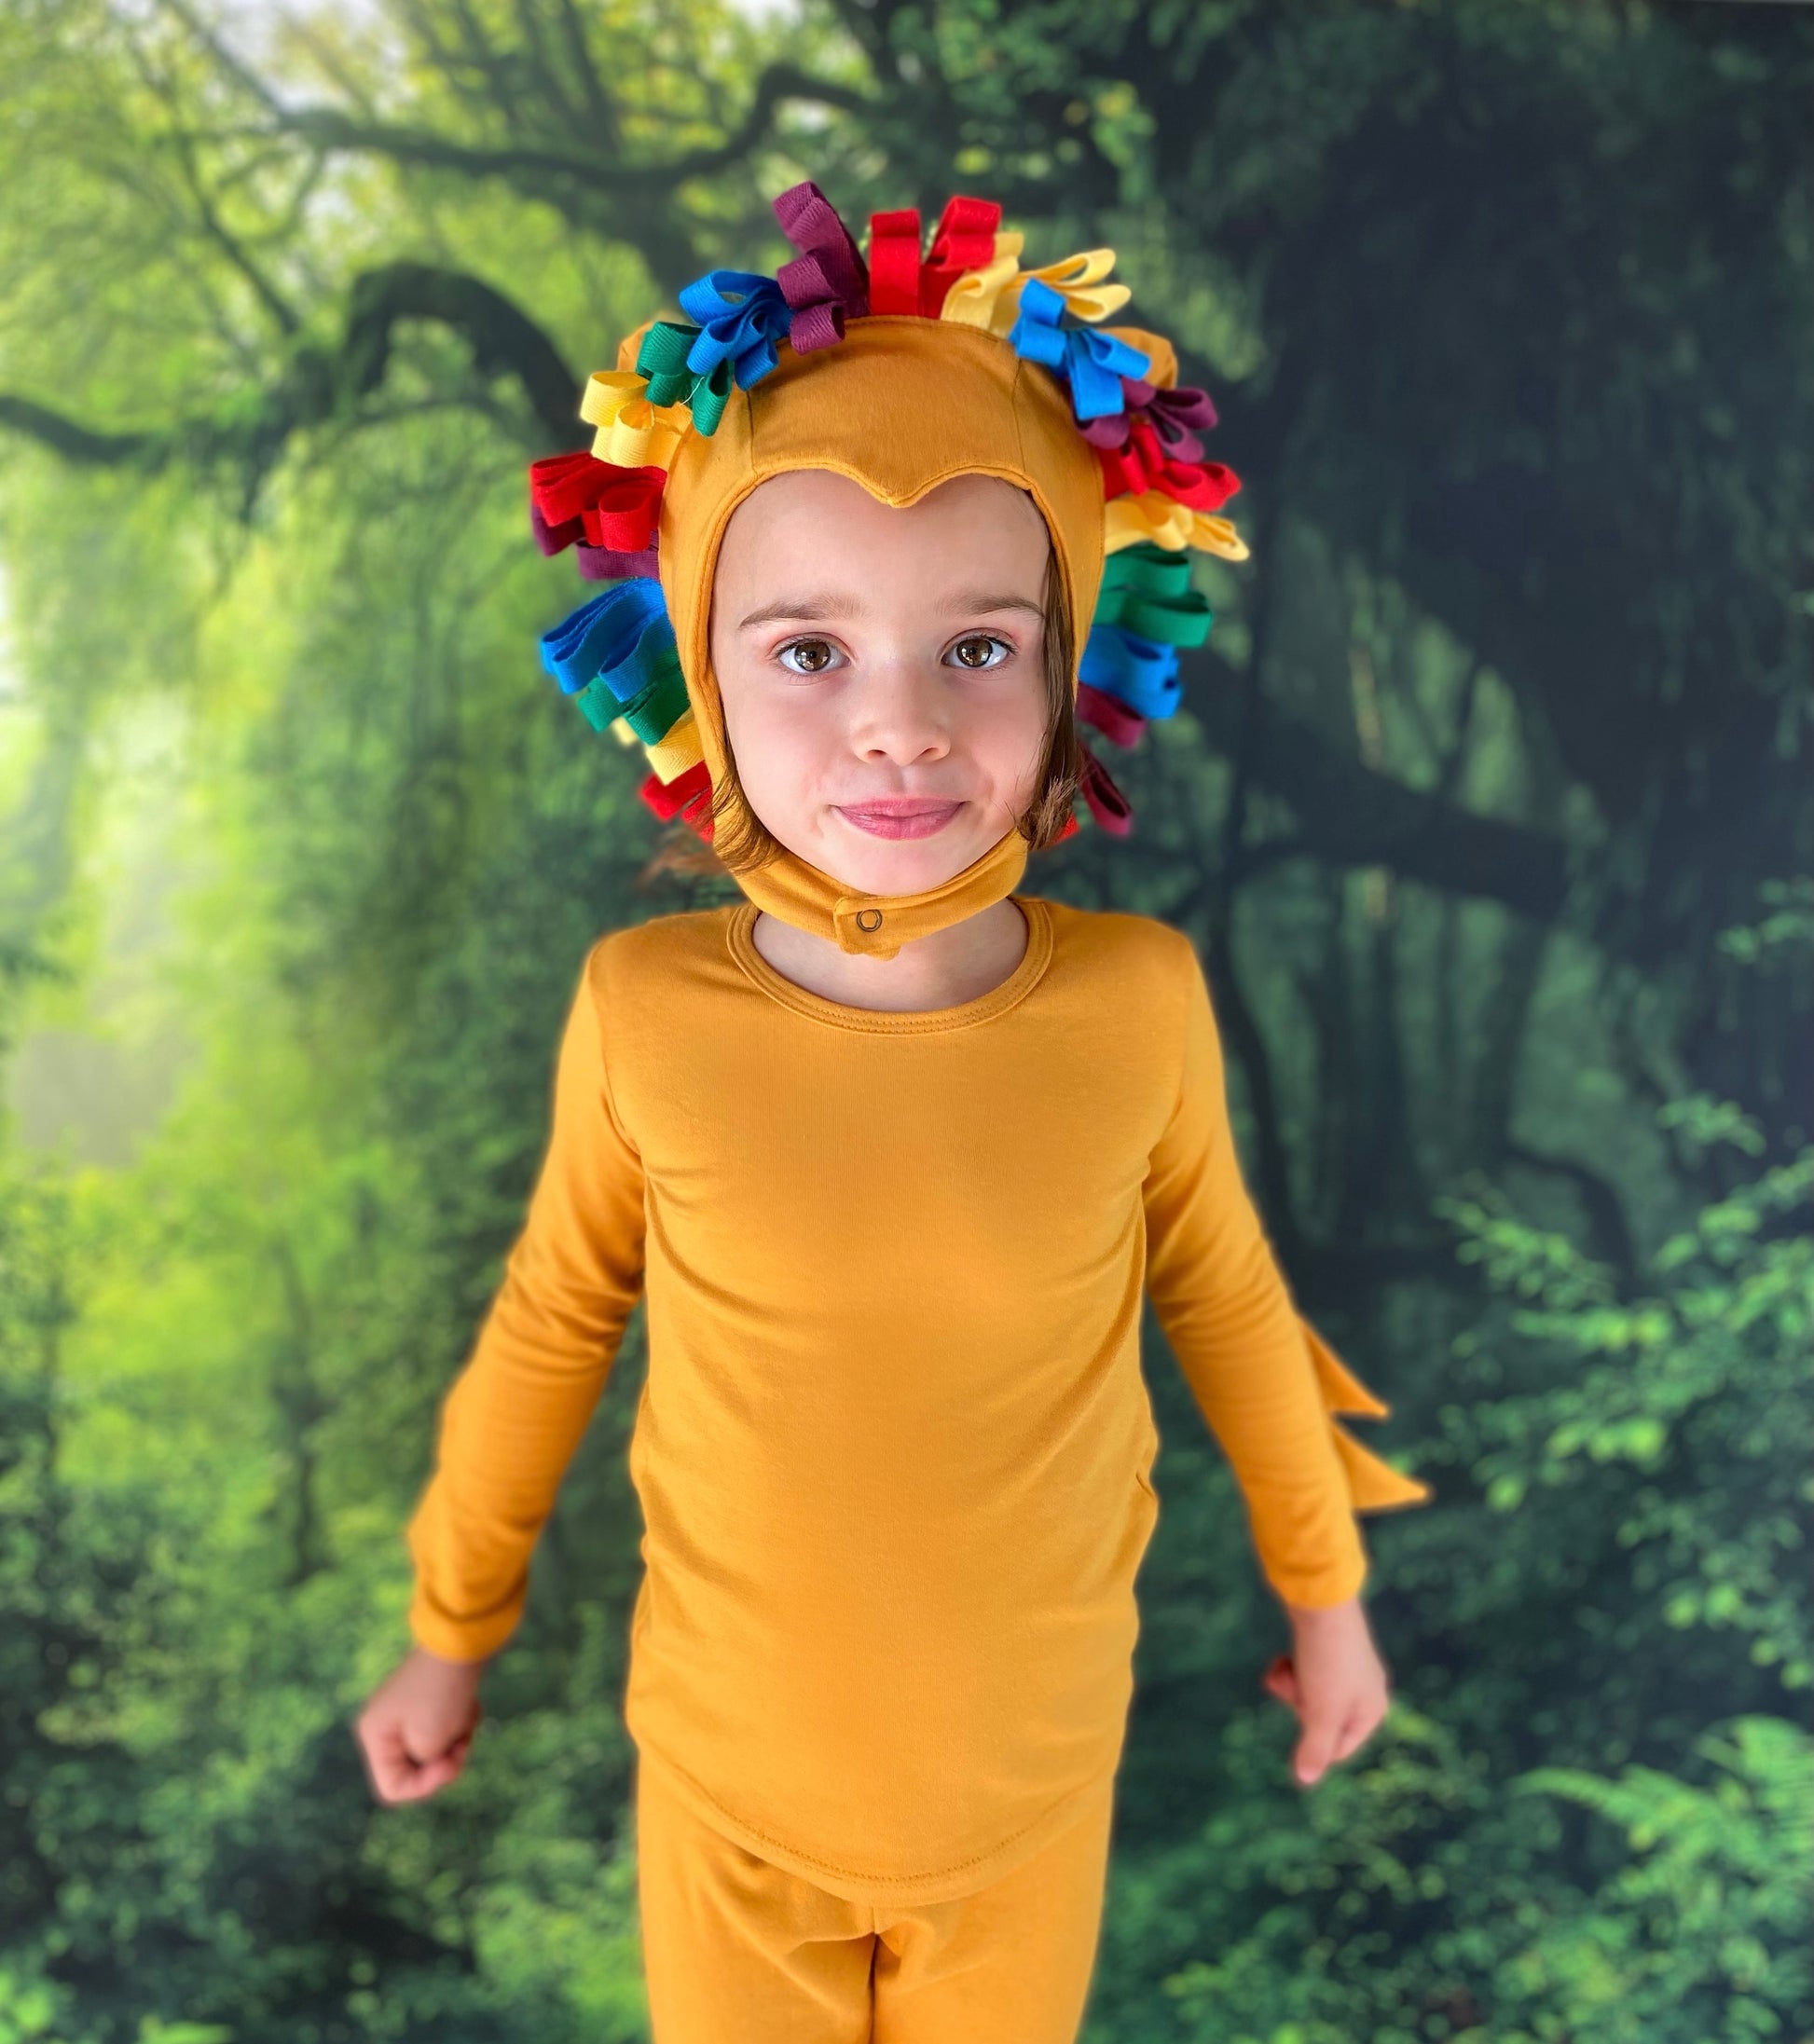 Lion costume for kids, halloween costume for kids, toddler lion costume, rainbow lion